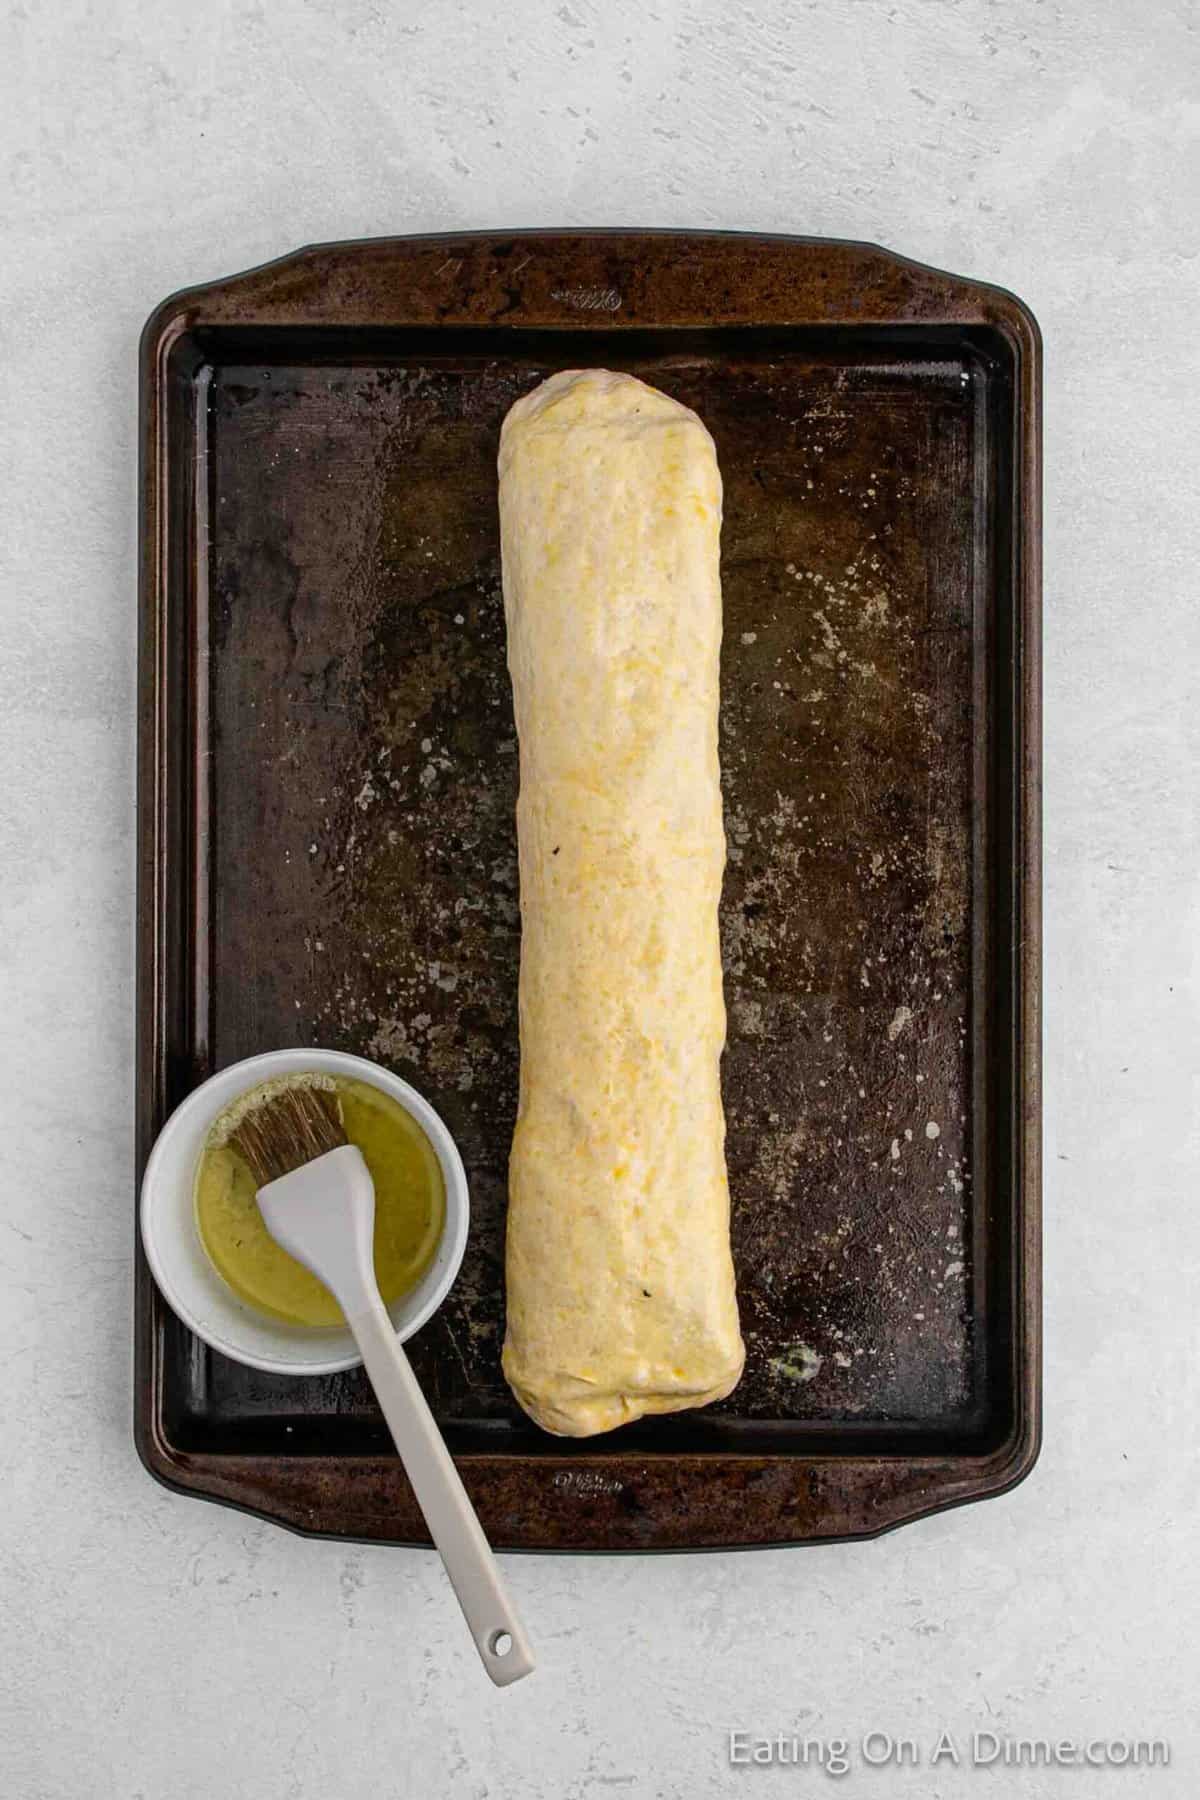 Brushing the rolled dough with melted butter